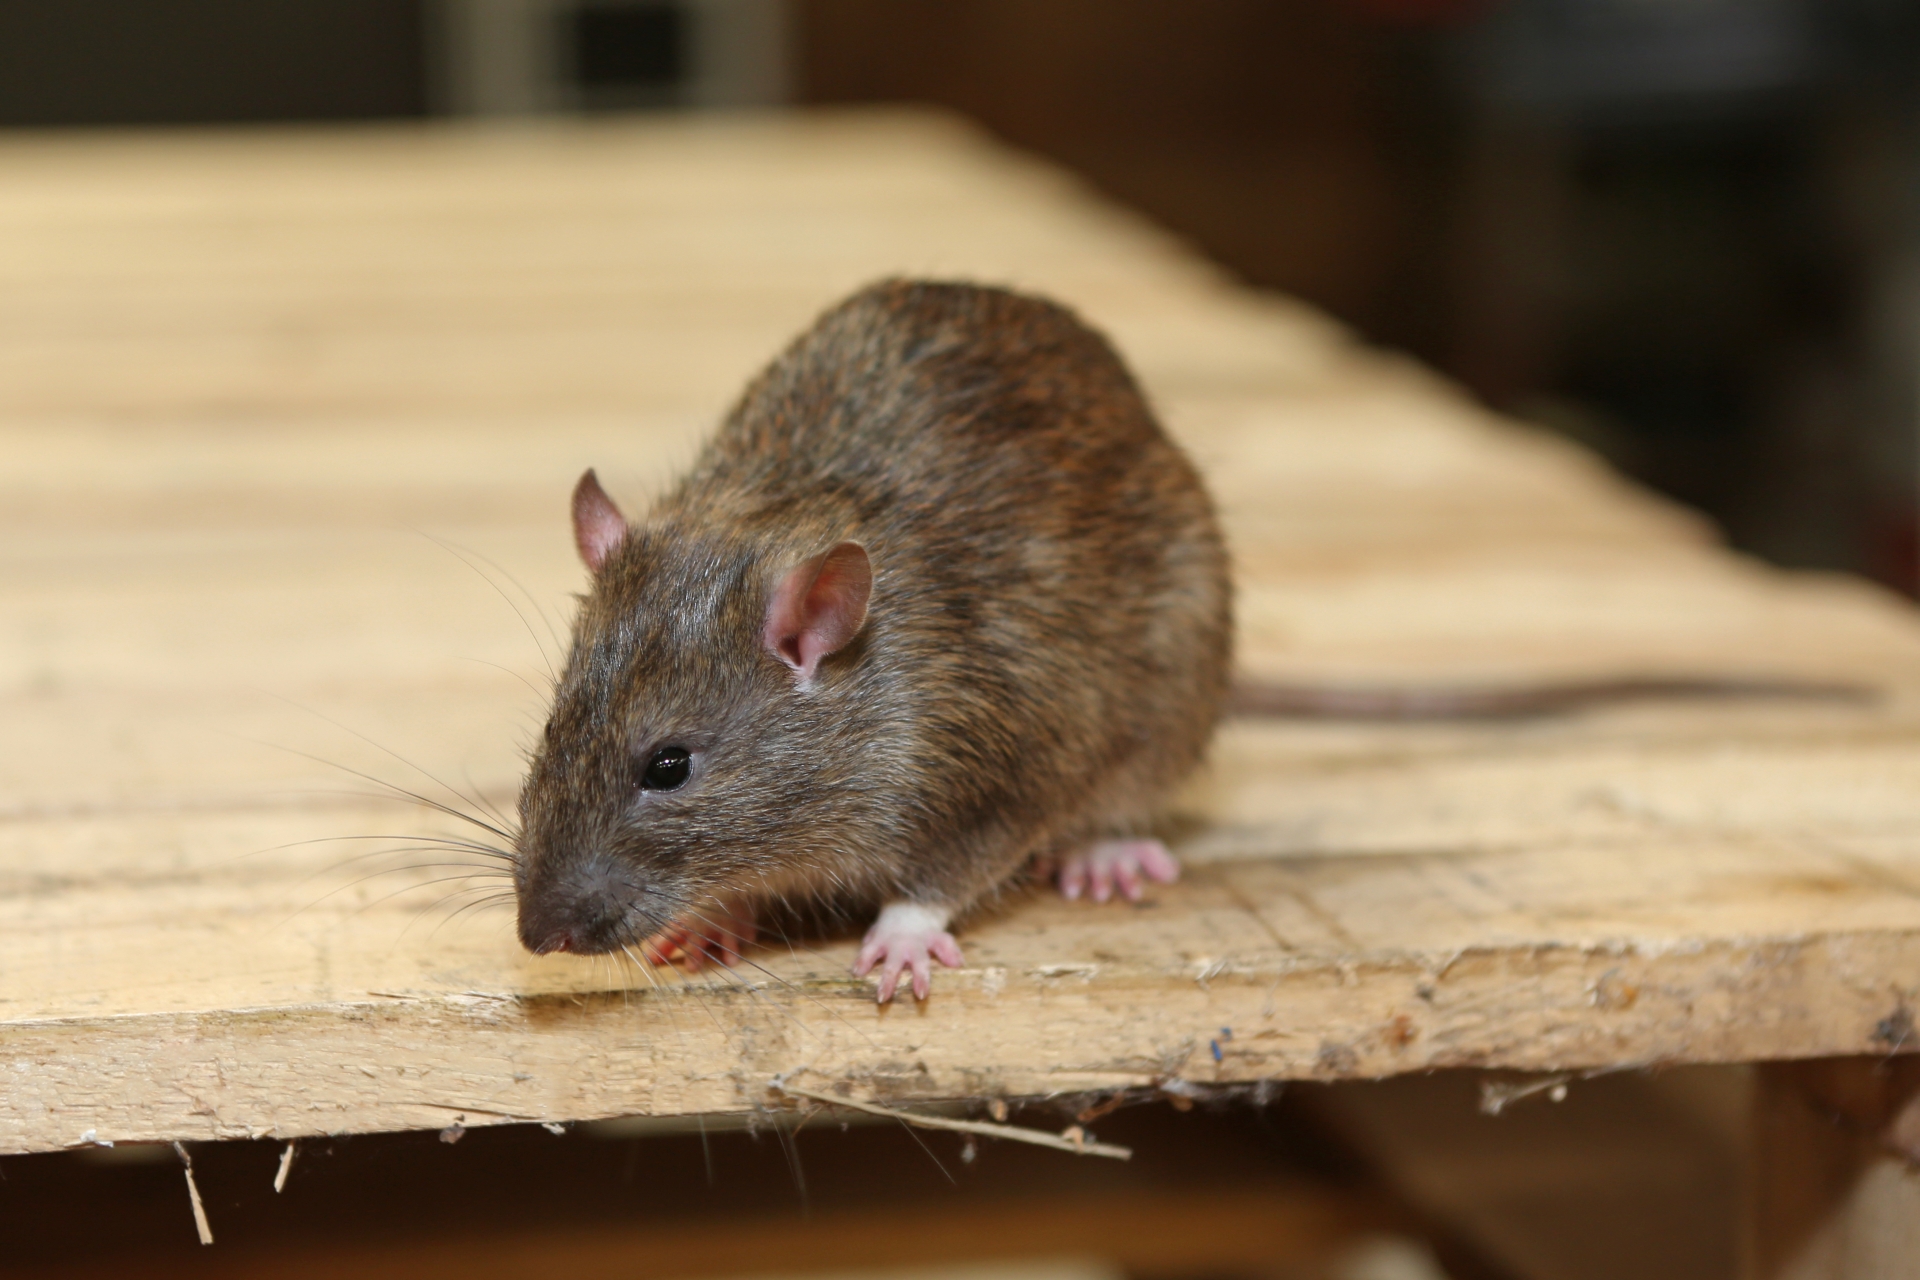 Rat Infestation, Pest Control in Tulse Hill, West Norwood, SE27. Call Now 020 8166 9746